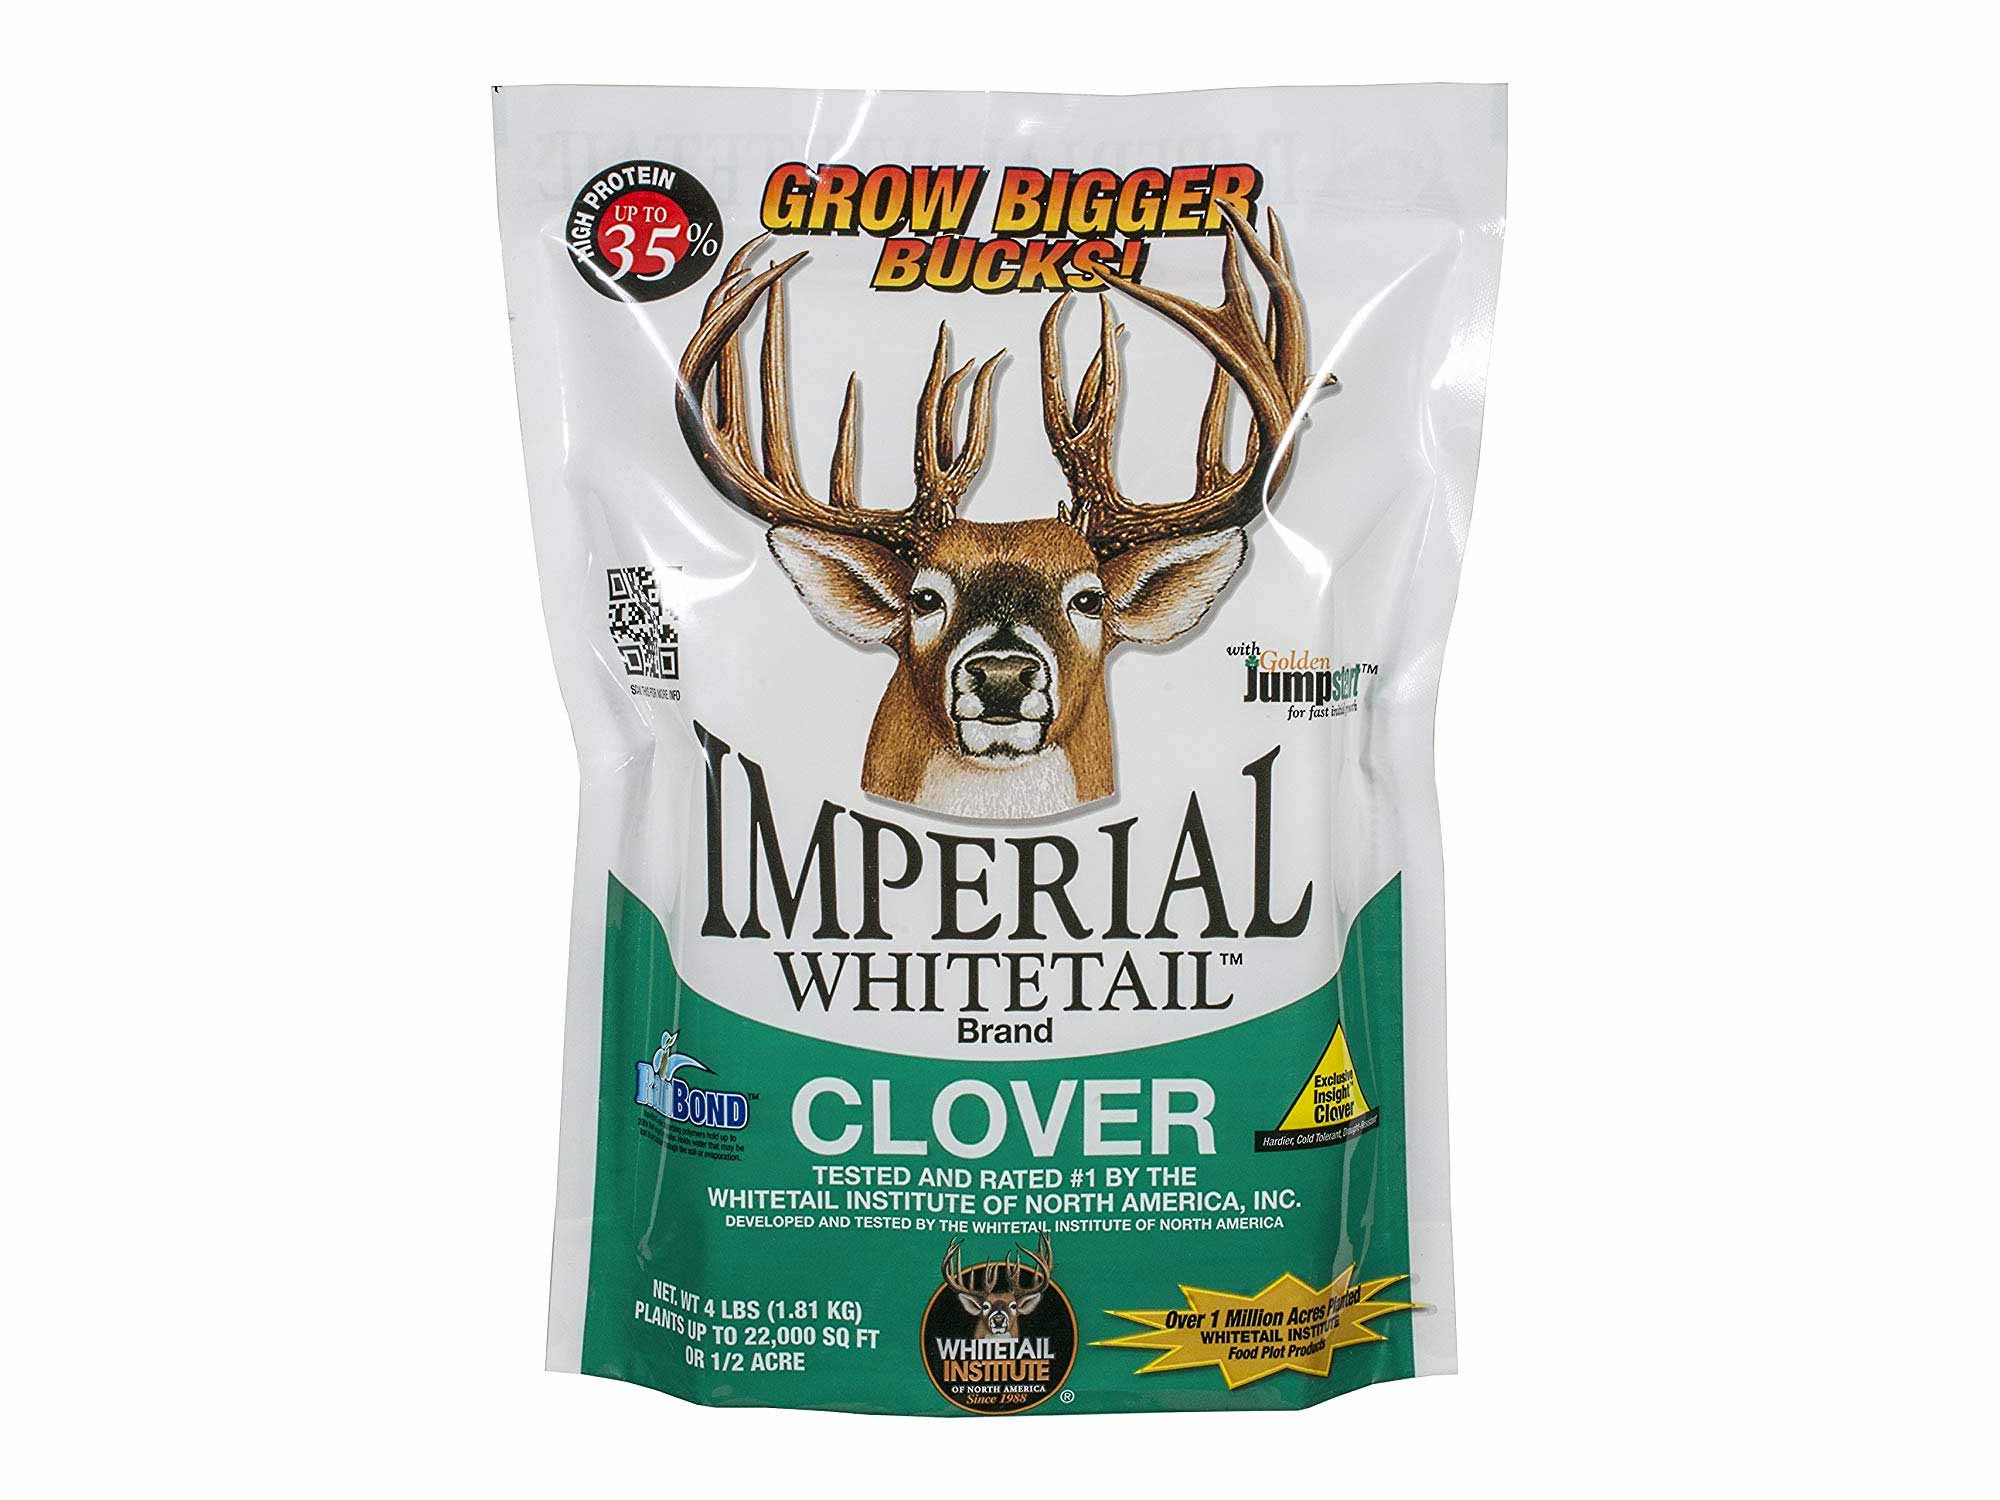 Imperial whitetail clover deer feed